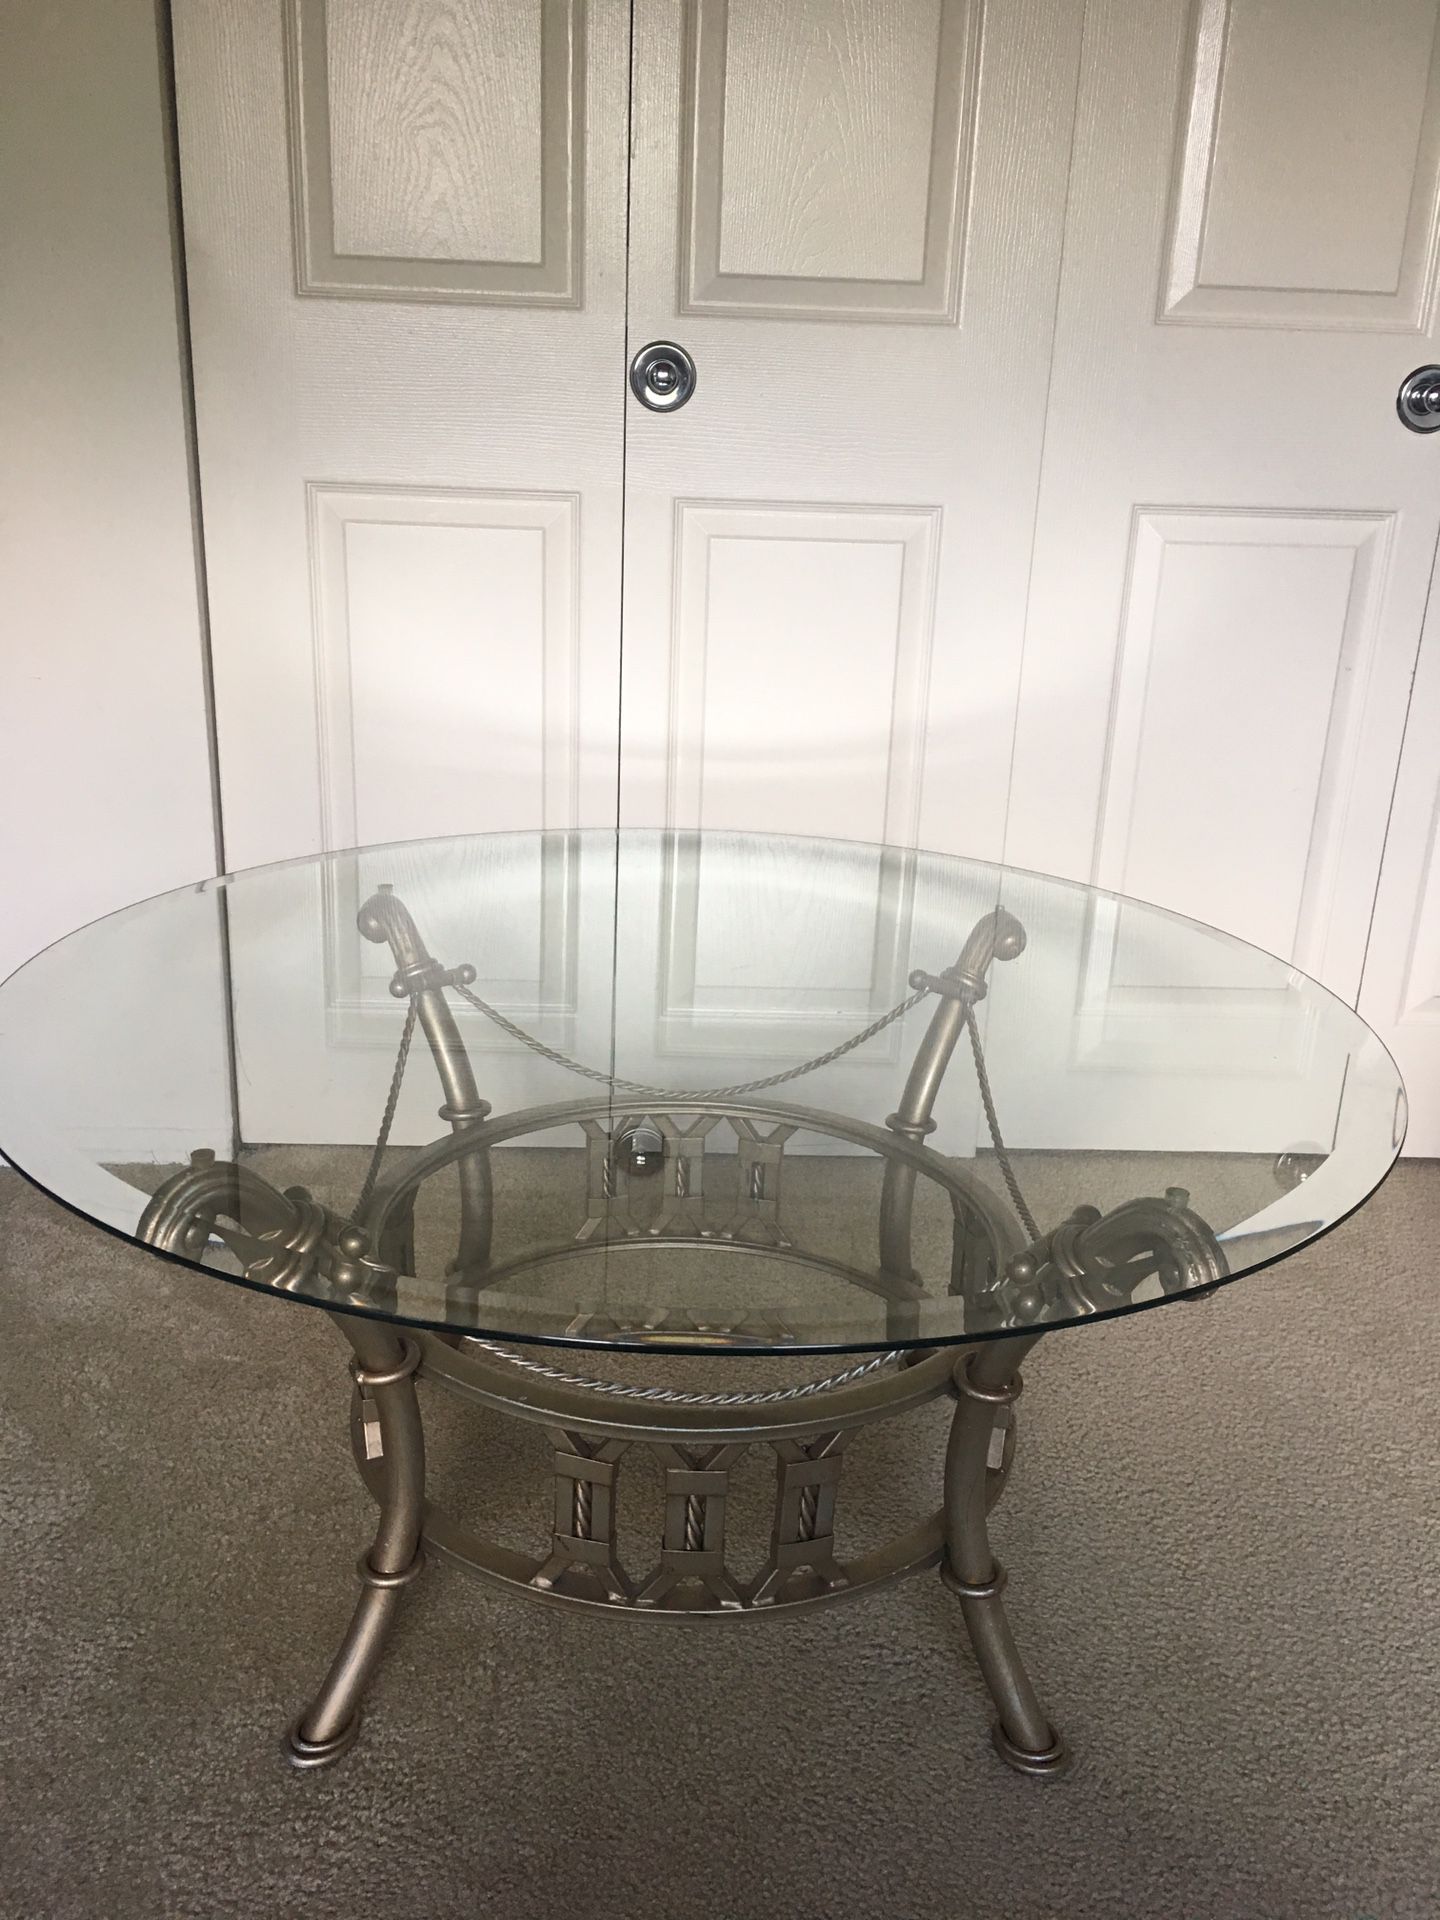 40” round glass living room table